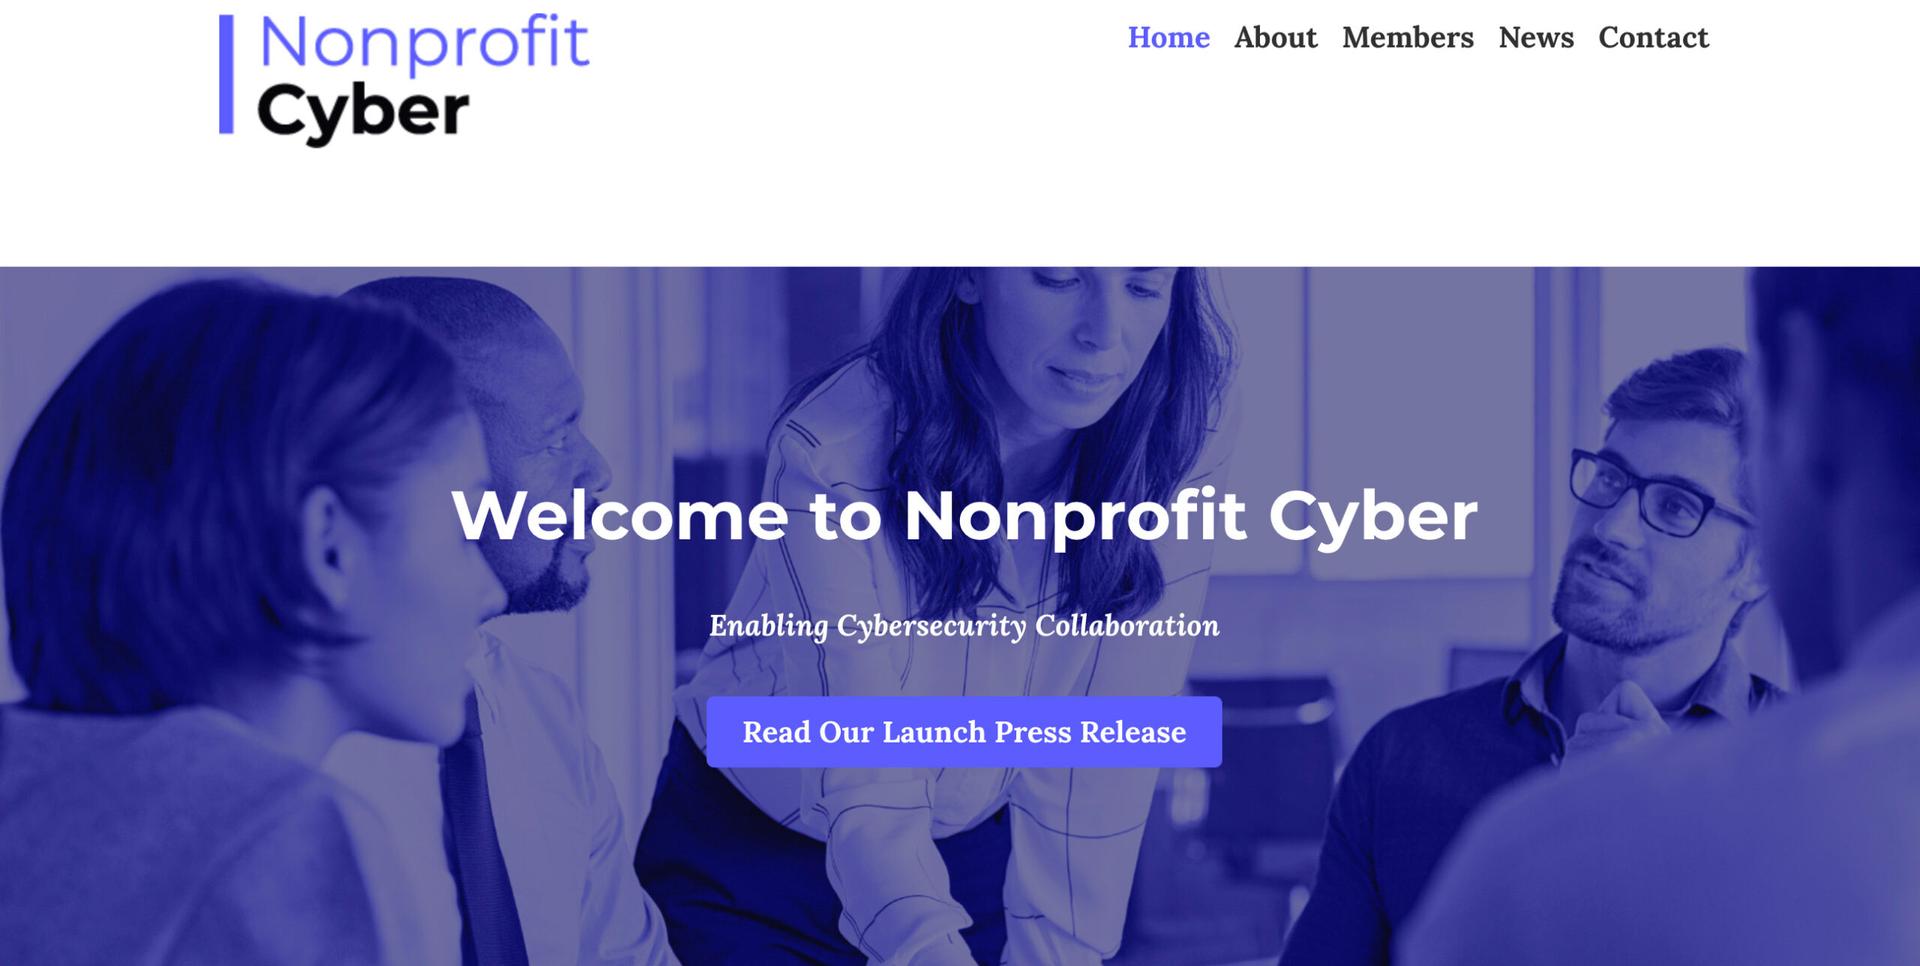 Twenty-two non-profits have banded together to coordinate on cyber initiatives and amplify each other&#8217;s research. (Photo source: Nonprofitcyber.org.)